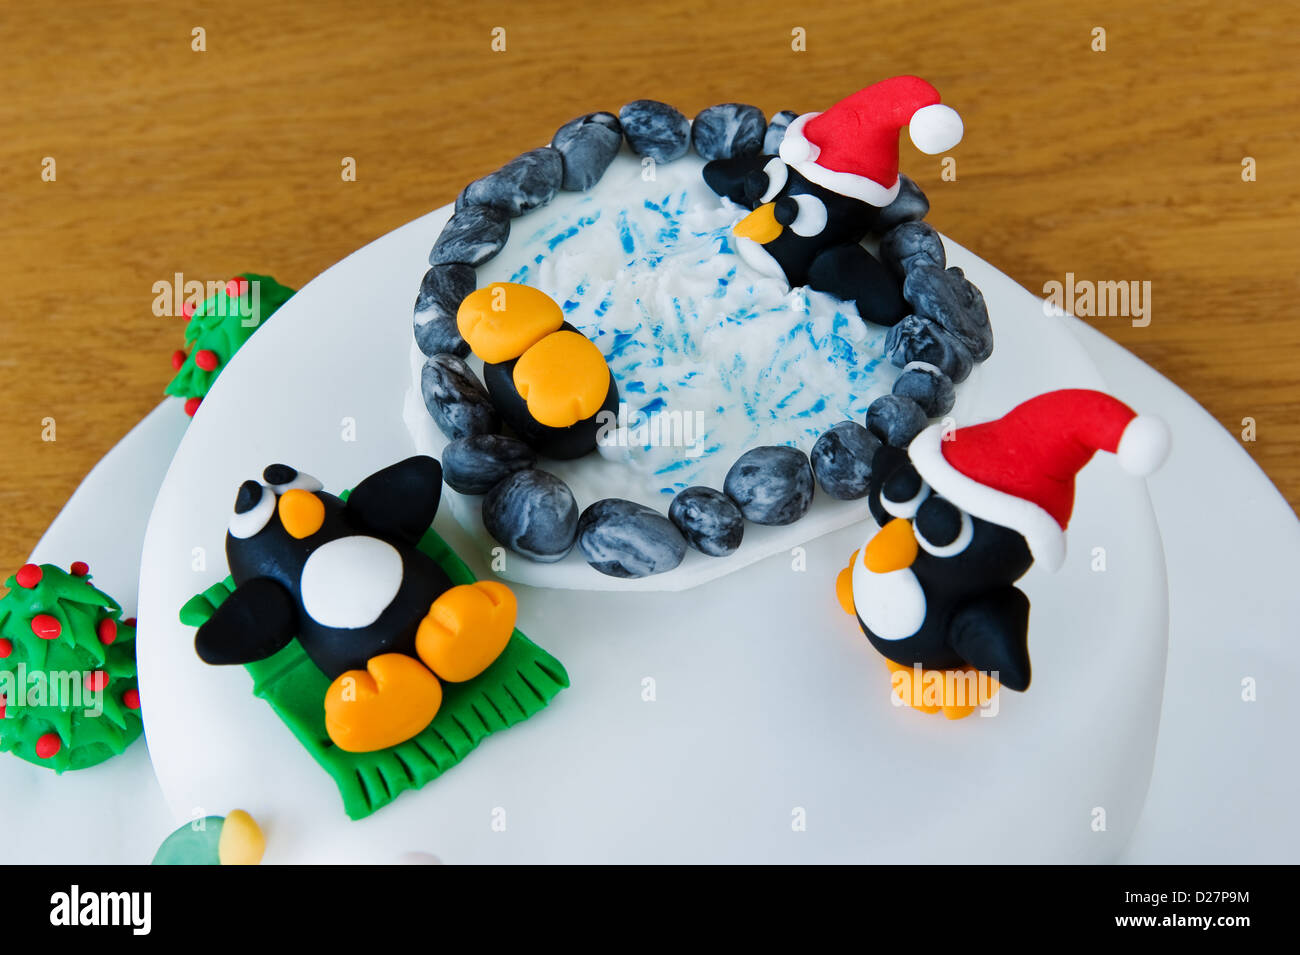 Novelty christmas cake, decorated with amusing penguins and snowmen. Stock Photo